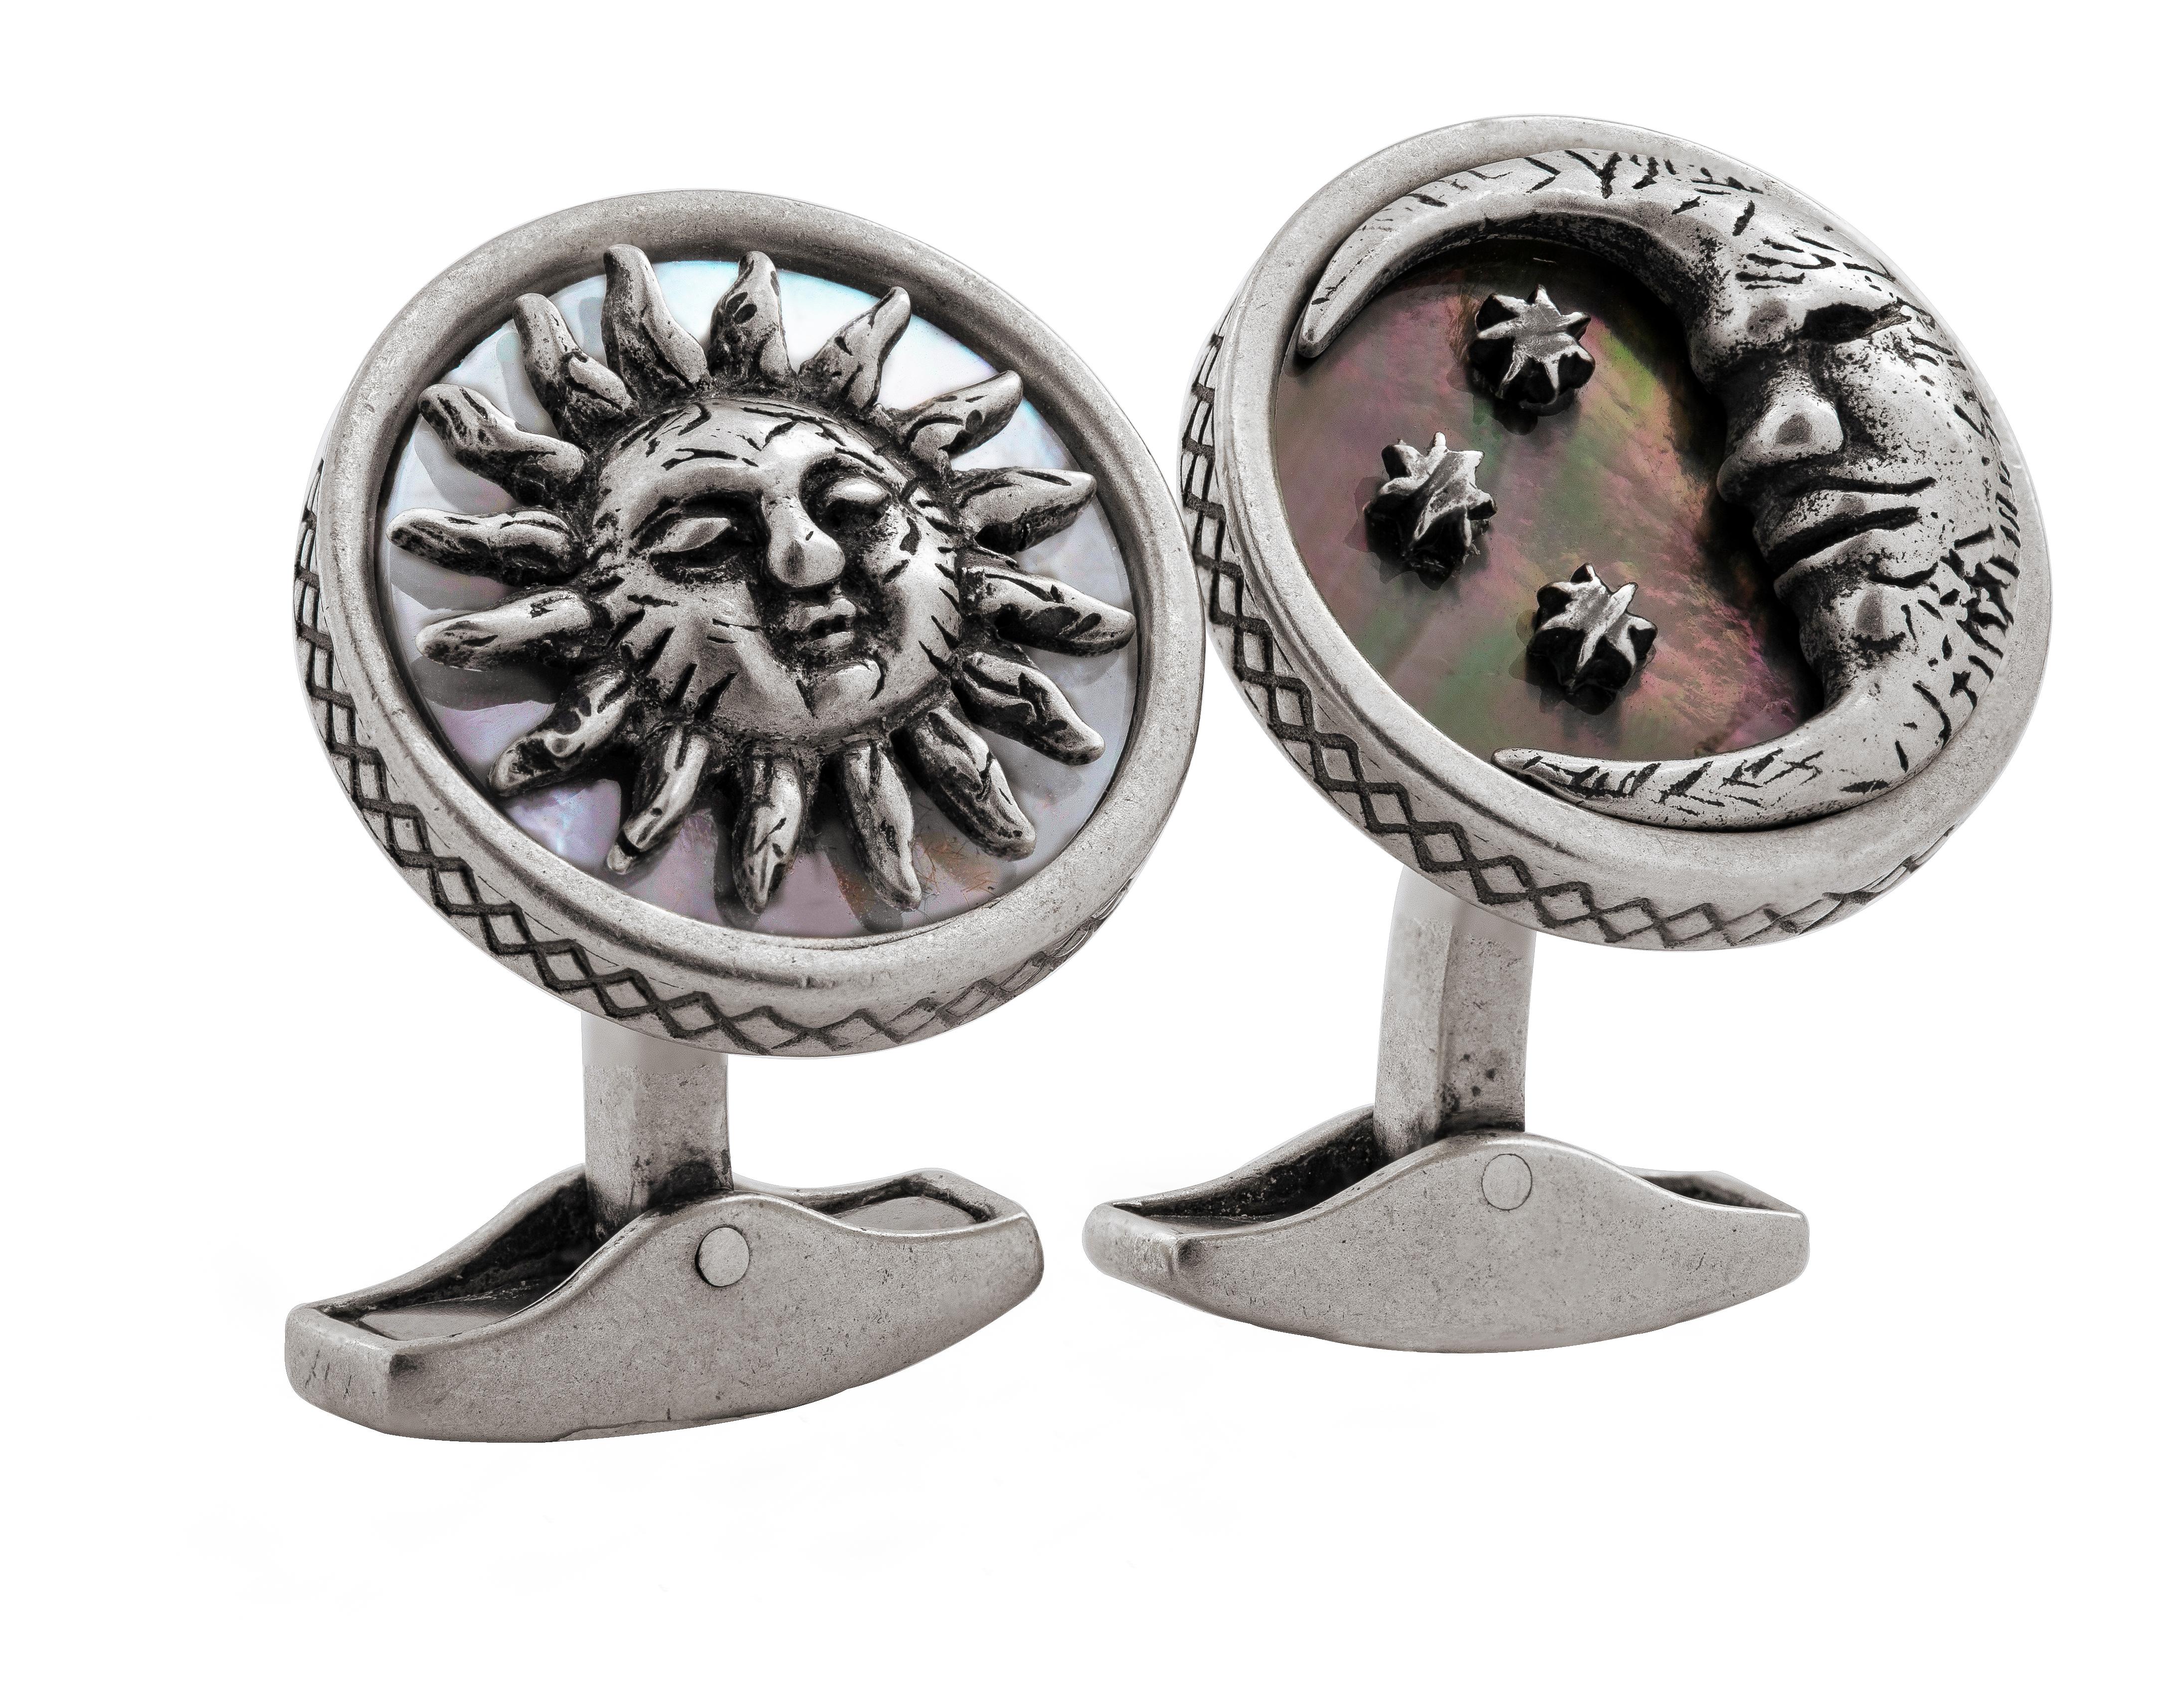 These striking cufflinks are a representation of the waning moon and the rising sun. They are embellished with silver detailing silhouetted on a background of mother of pearl, white for the bright day and black for the mysterious night. Express your